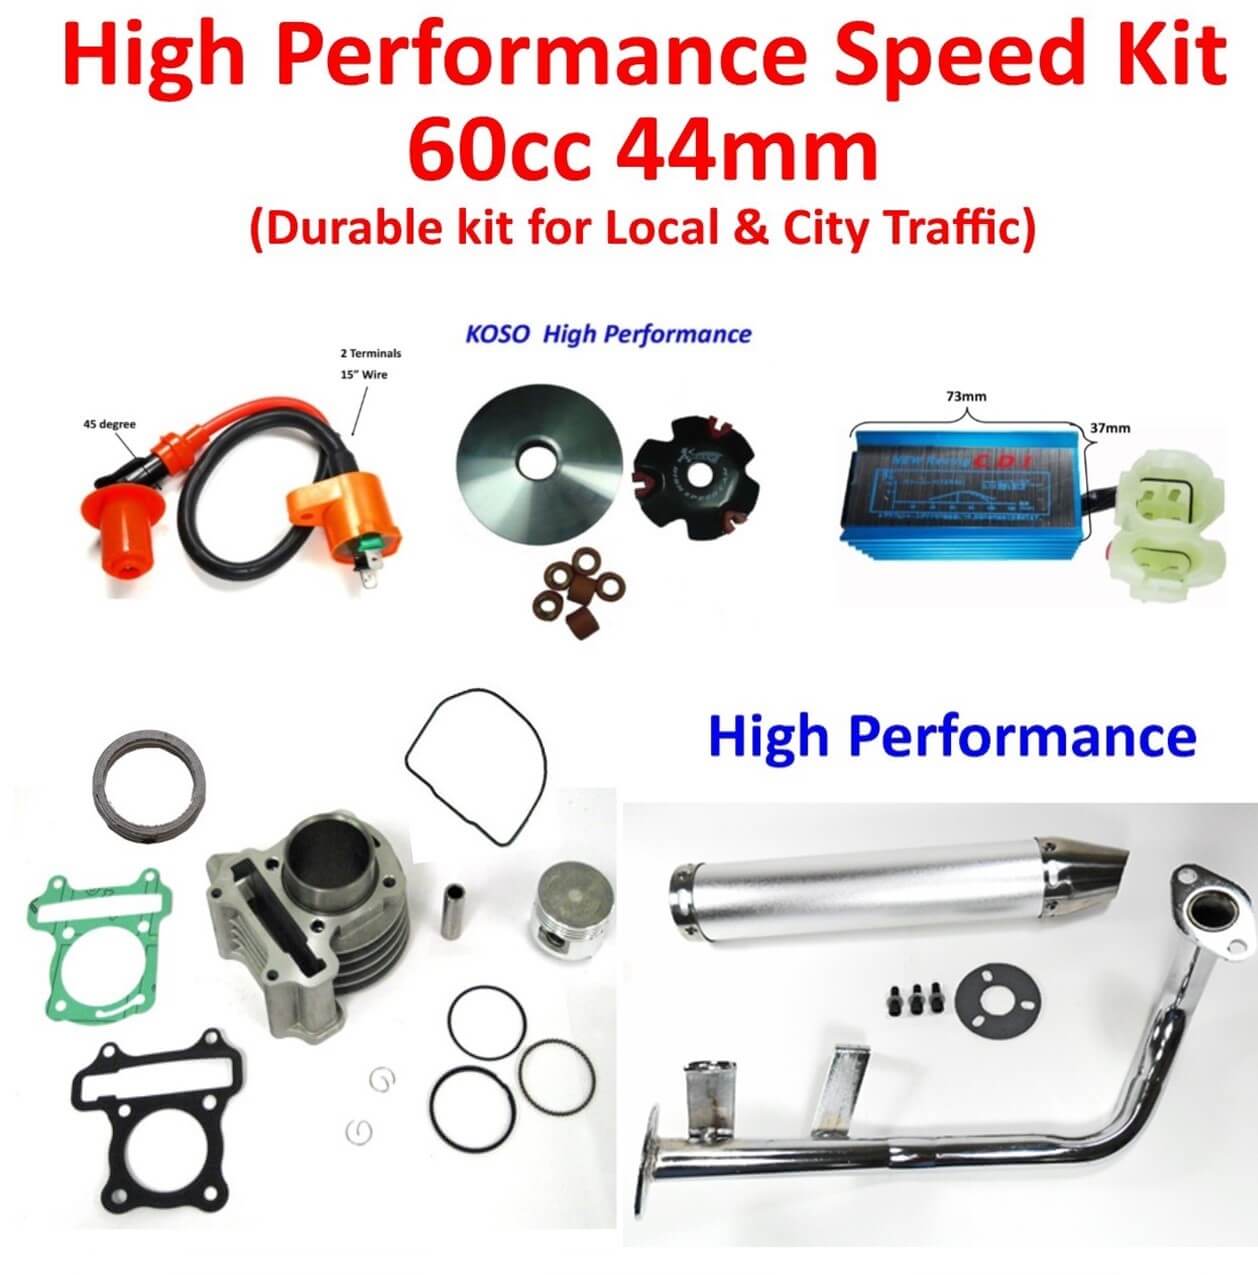 High Performance Speed Kit GY6-60cc (44mm) Comes with all parts shown.